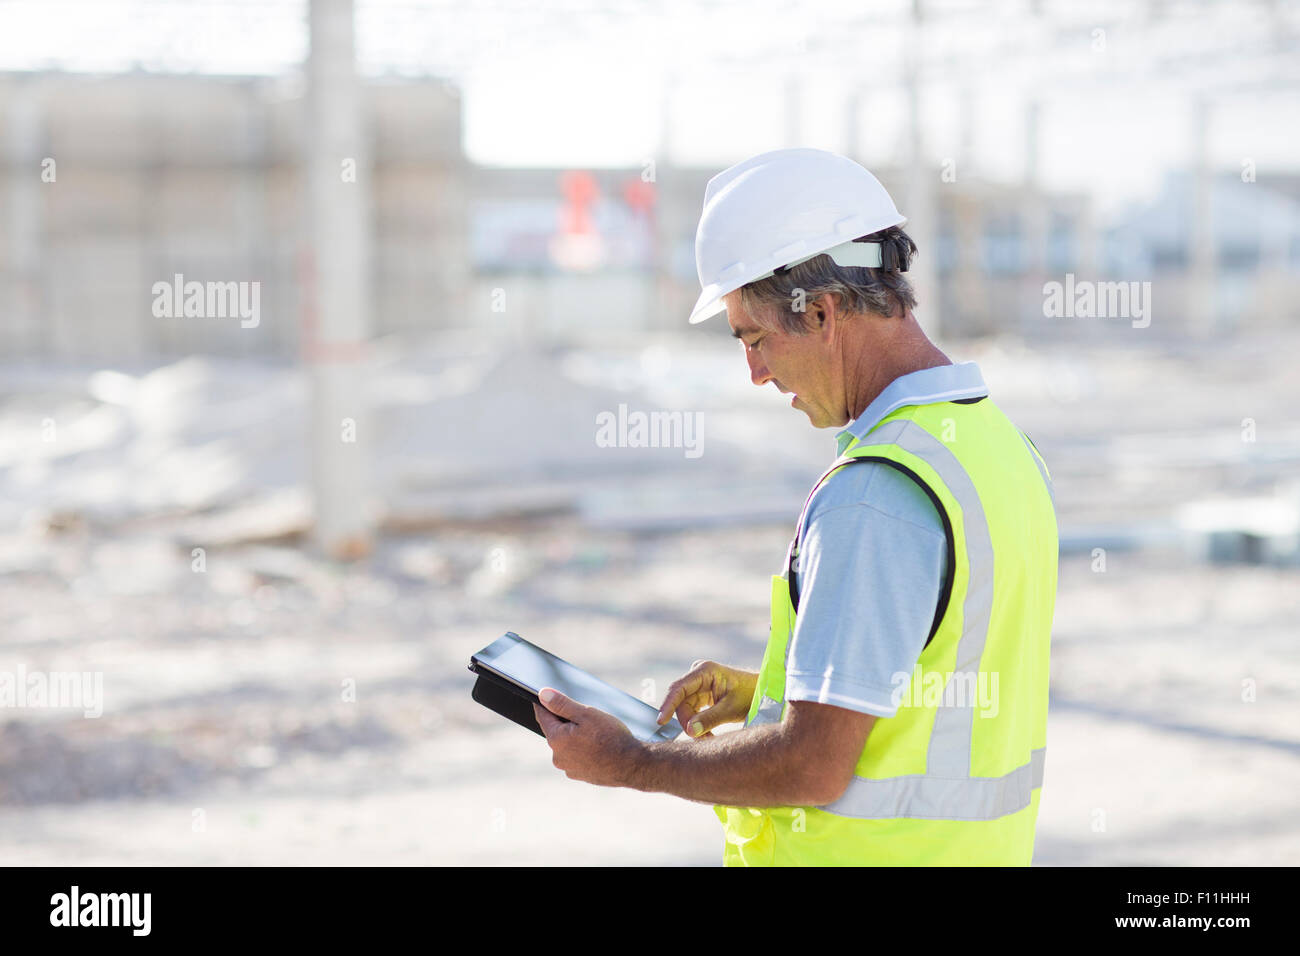 Young architect using digital tablet at construction site Banque D'Images